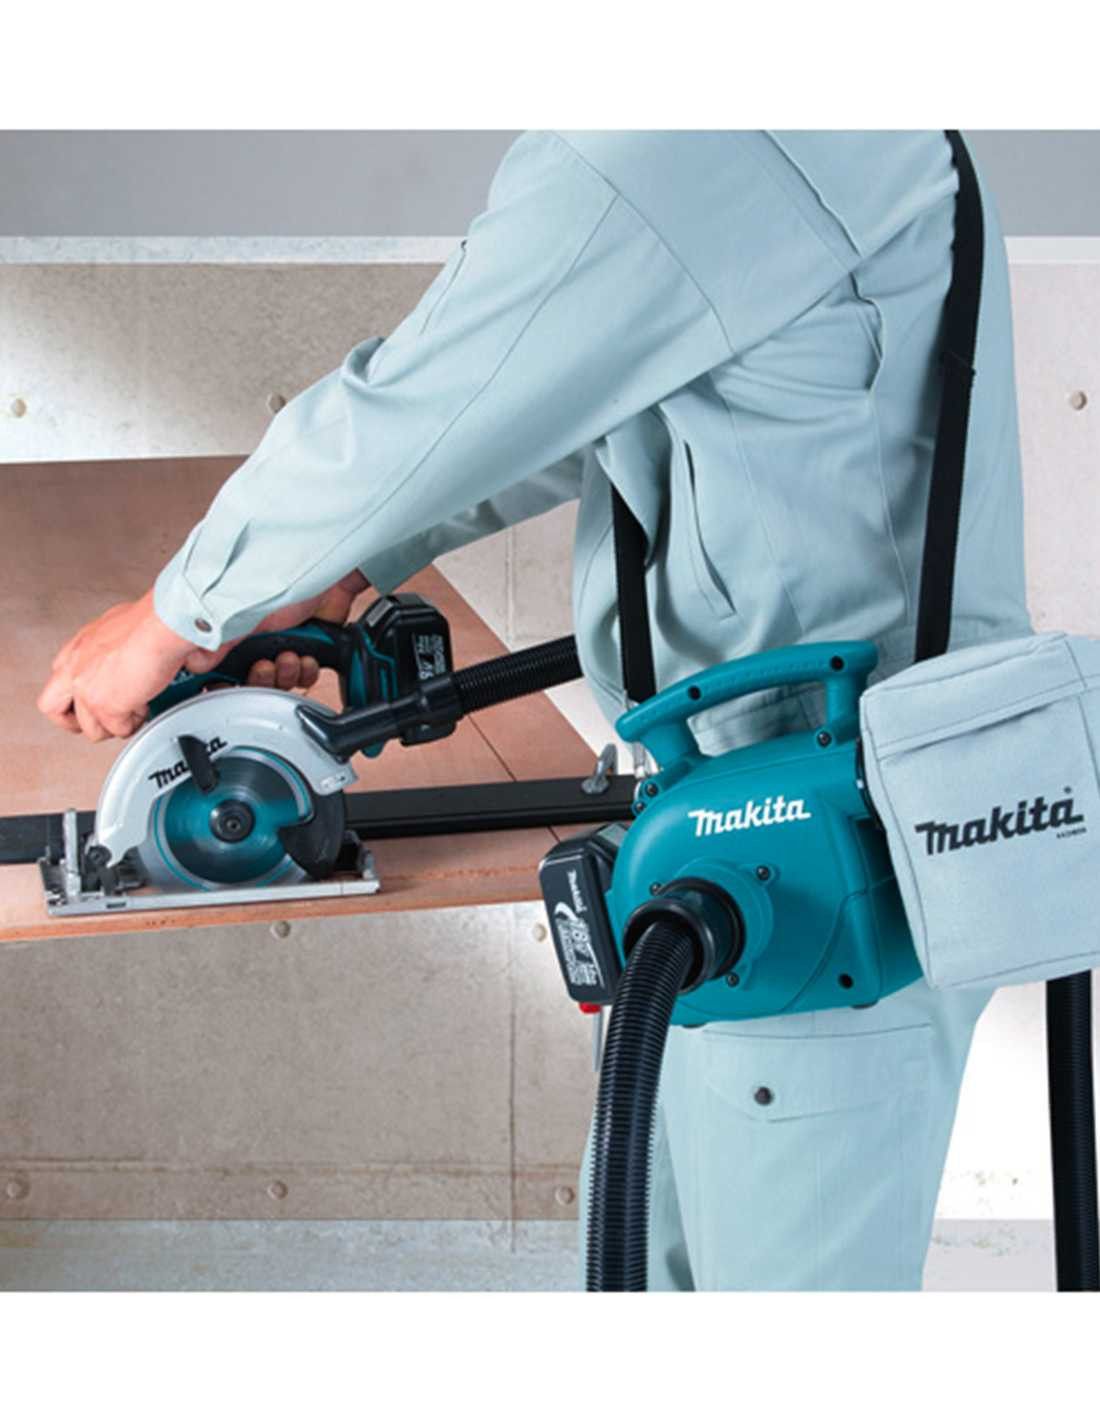 Makita kit with 10 tools + 3 bat + charger + 2 bags DLX1071BL3